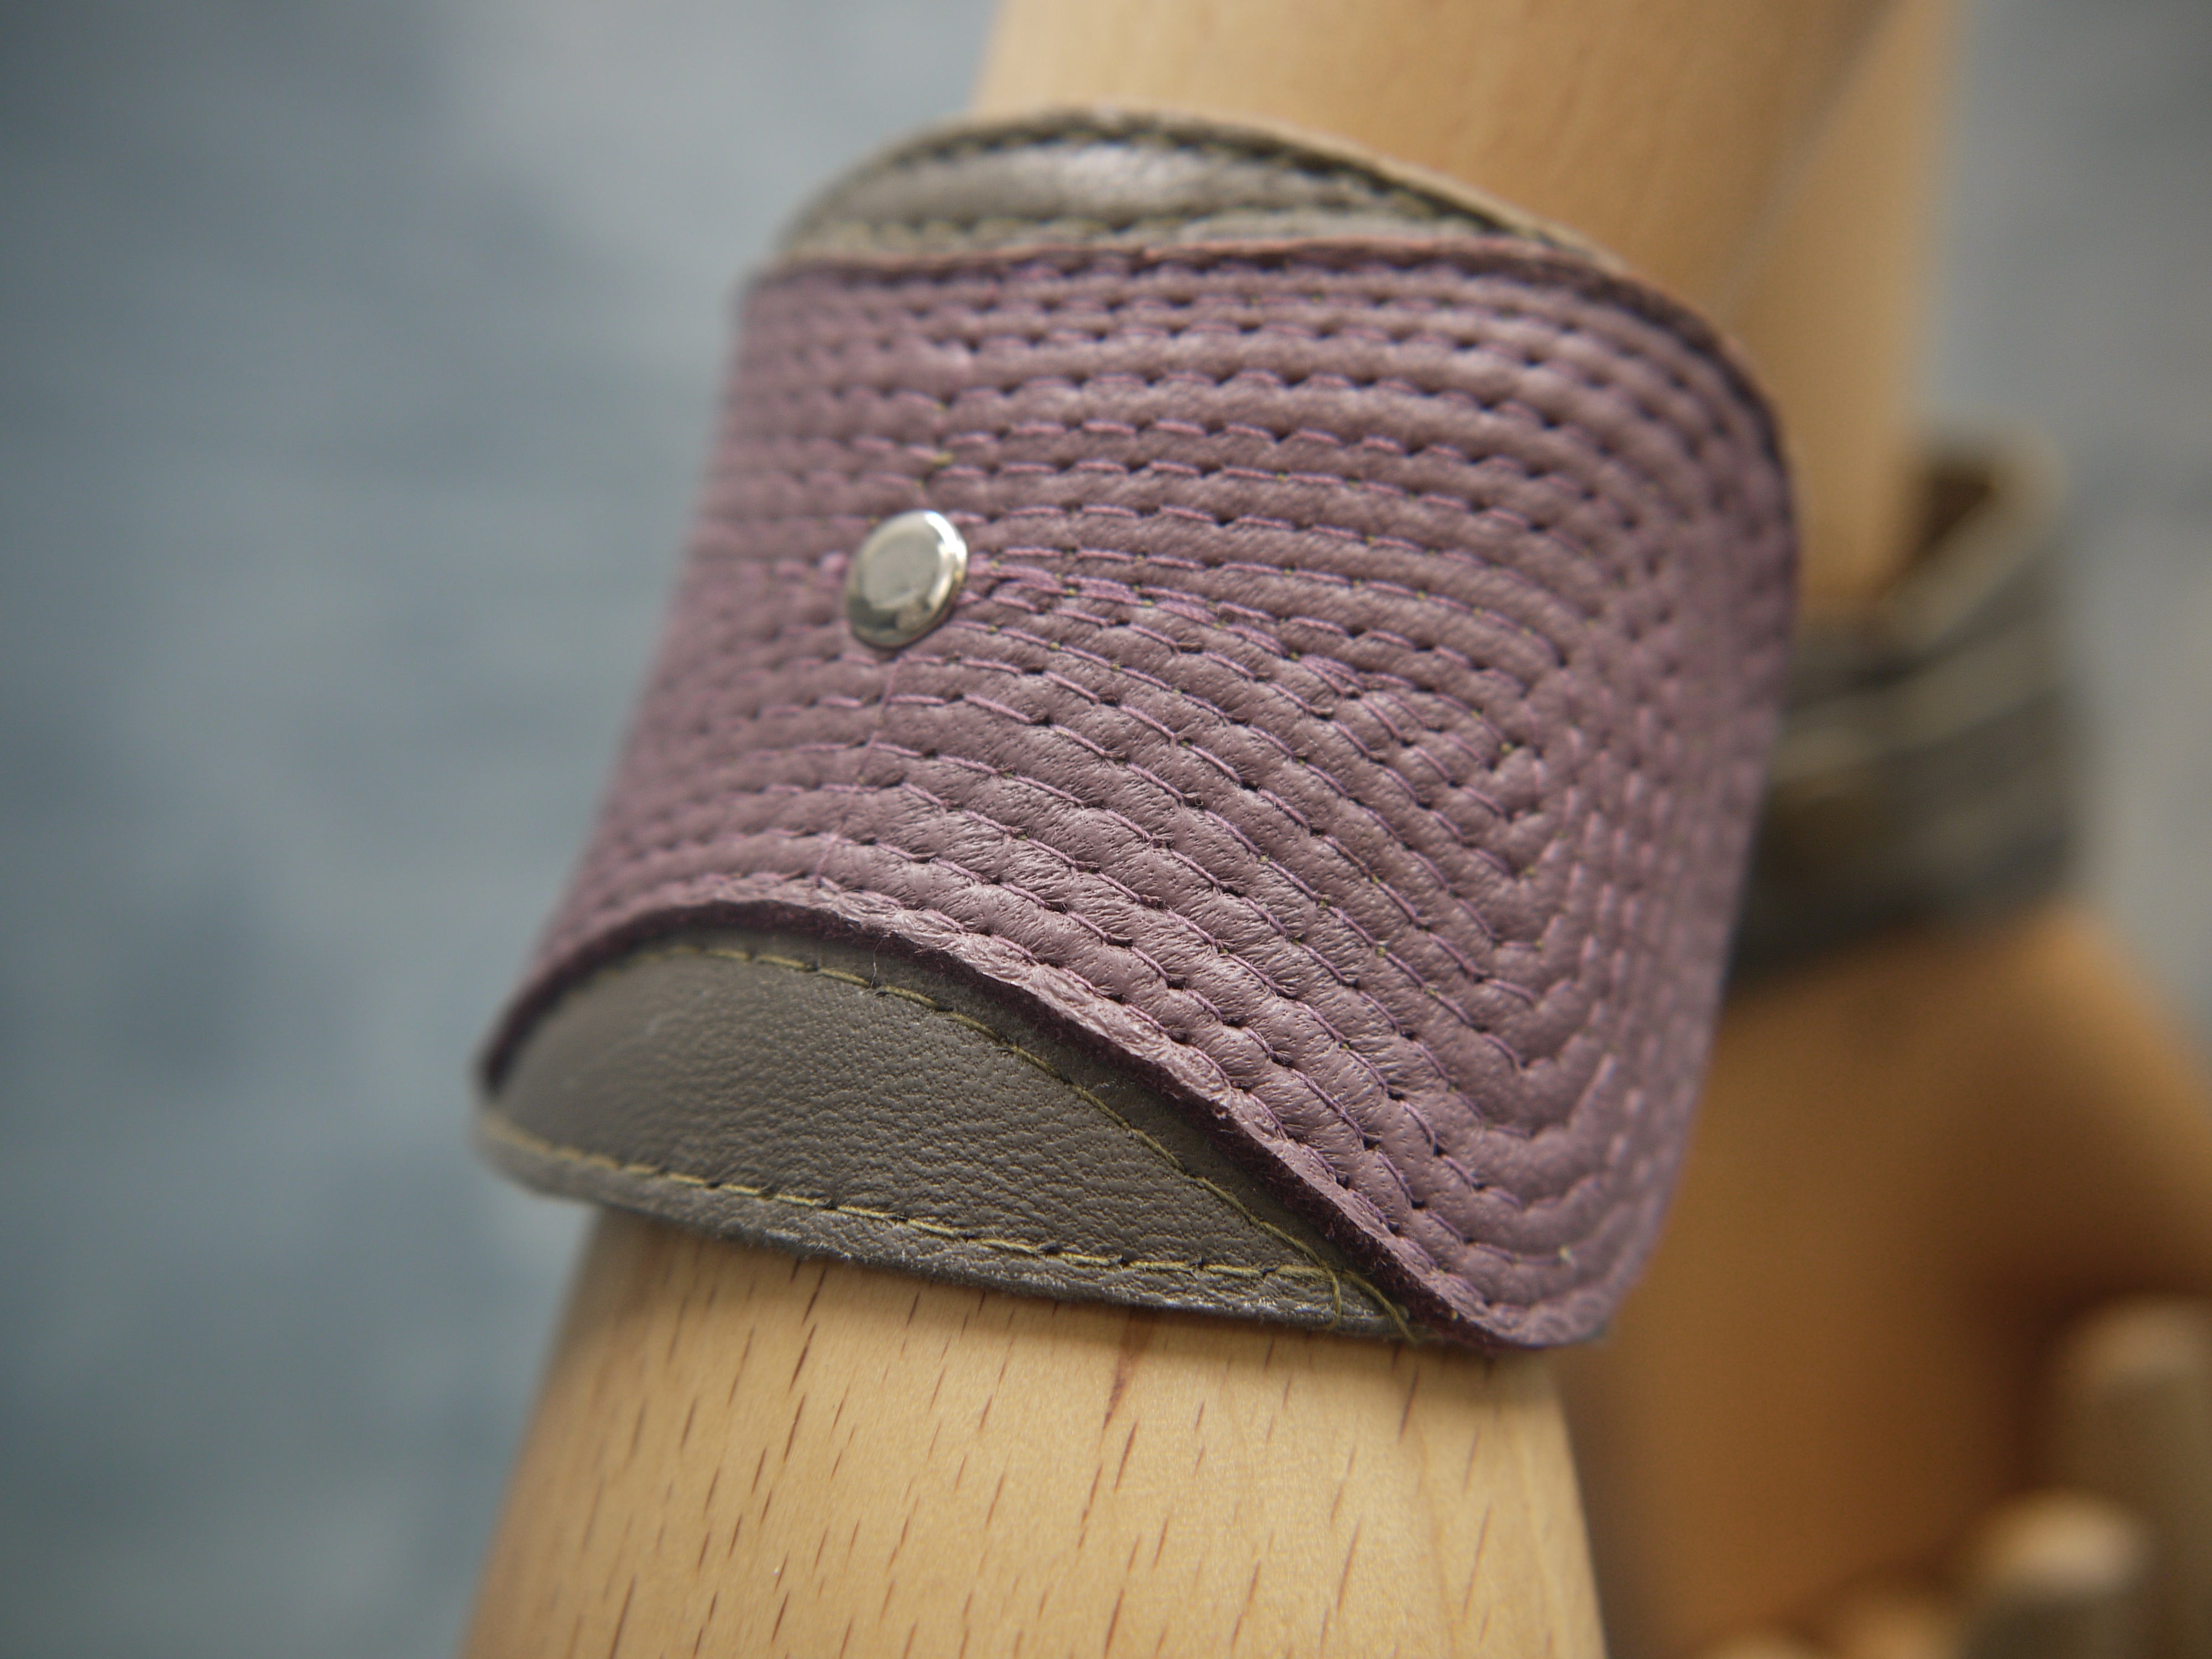 Leather cuff in olive green and smokey lilac. The central smokey lilac lozenge shape section has a concentrical stitching detail.There is a central steel circle as a focal point where the stitching ends. Close-Up image